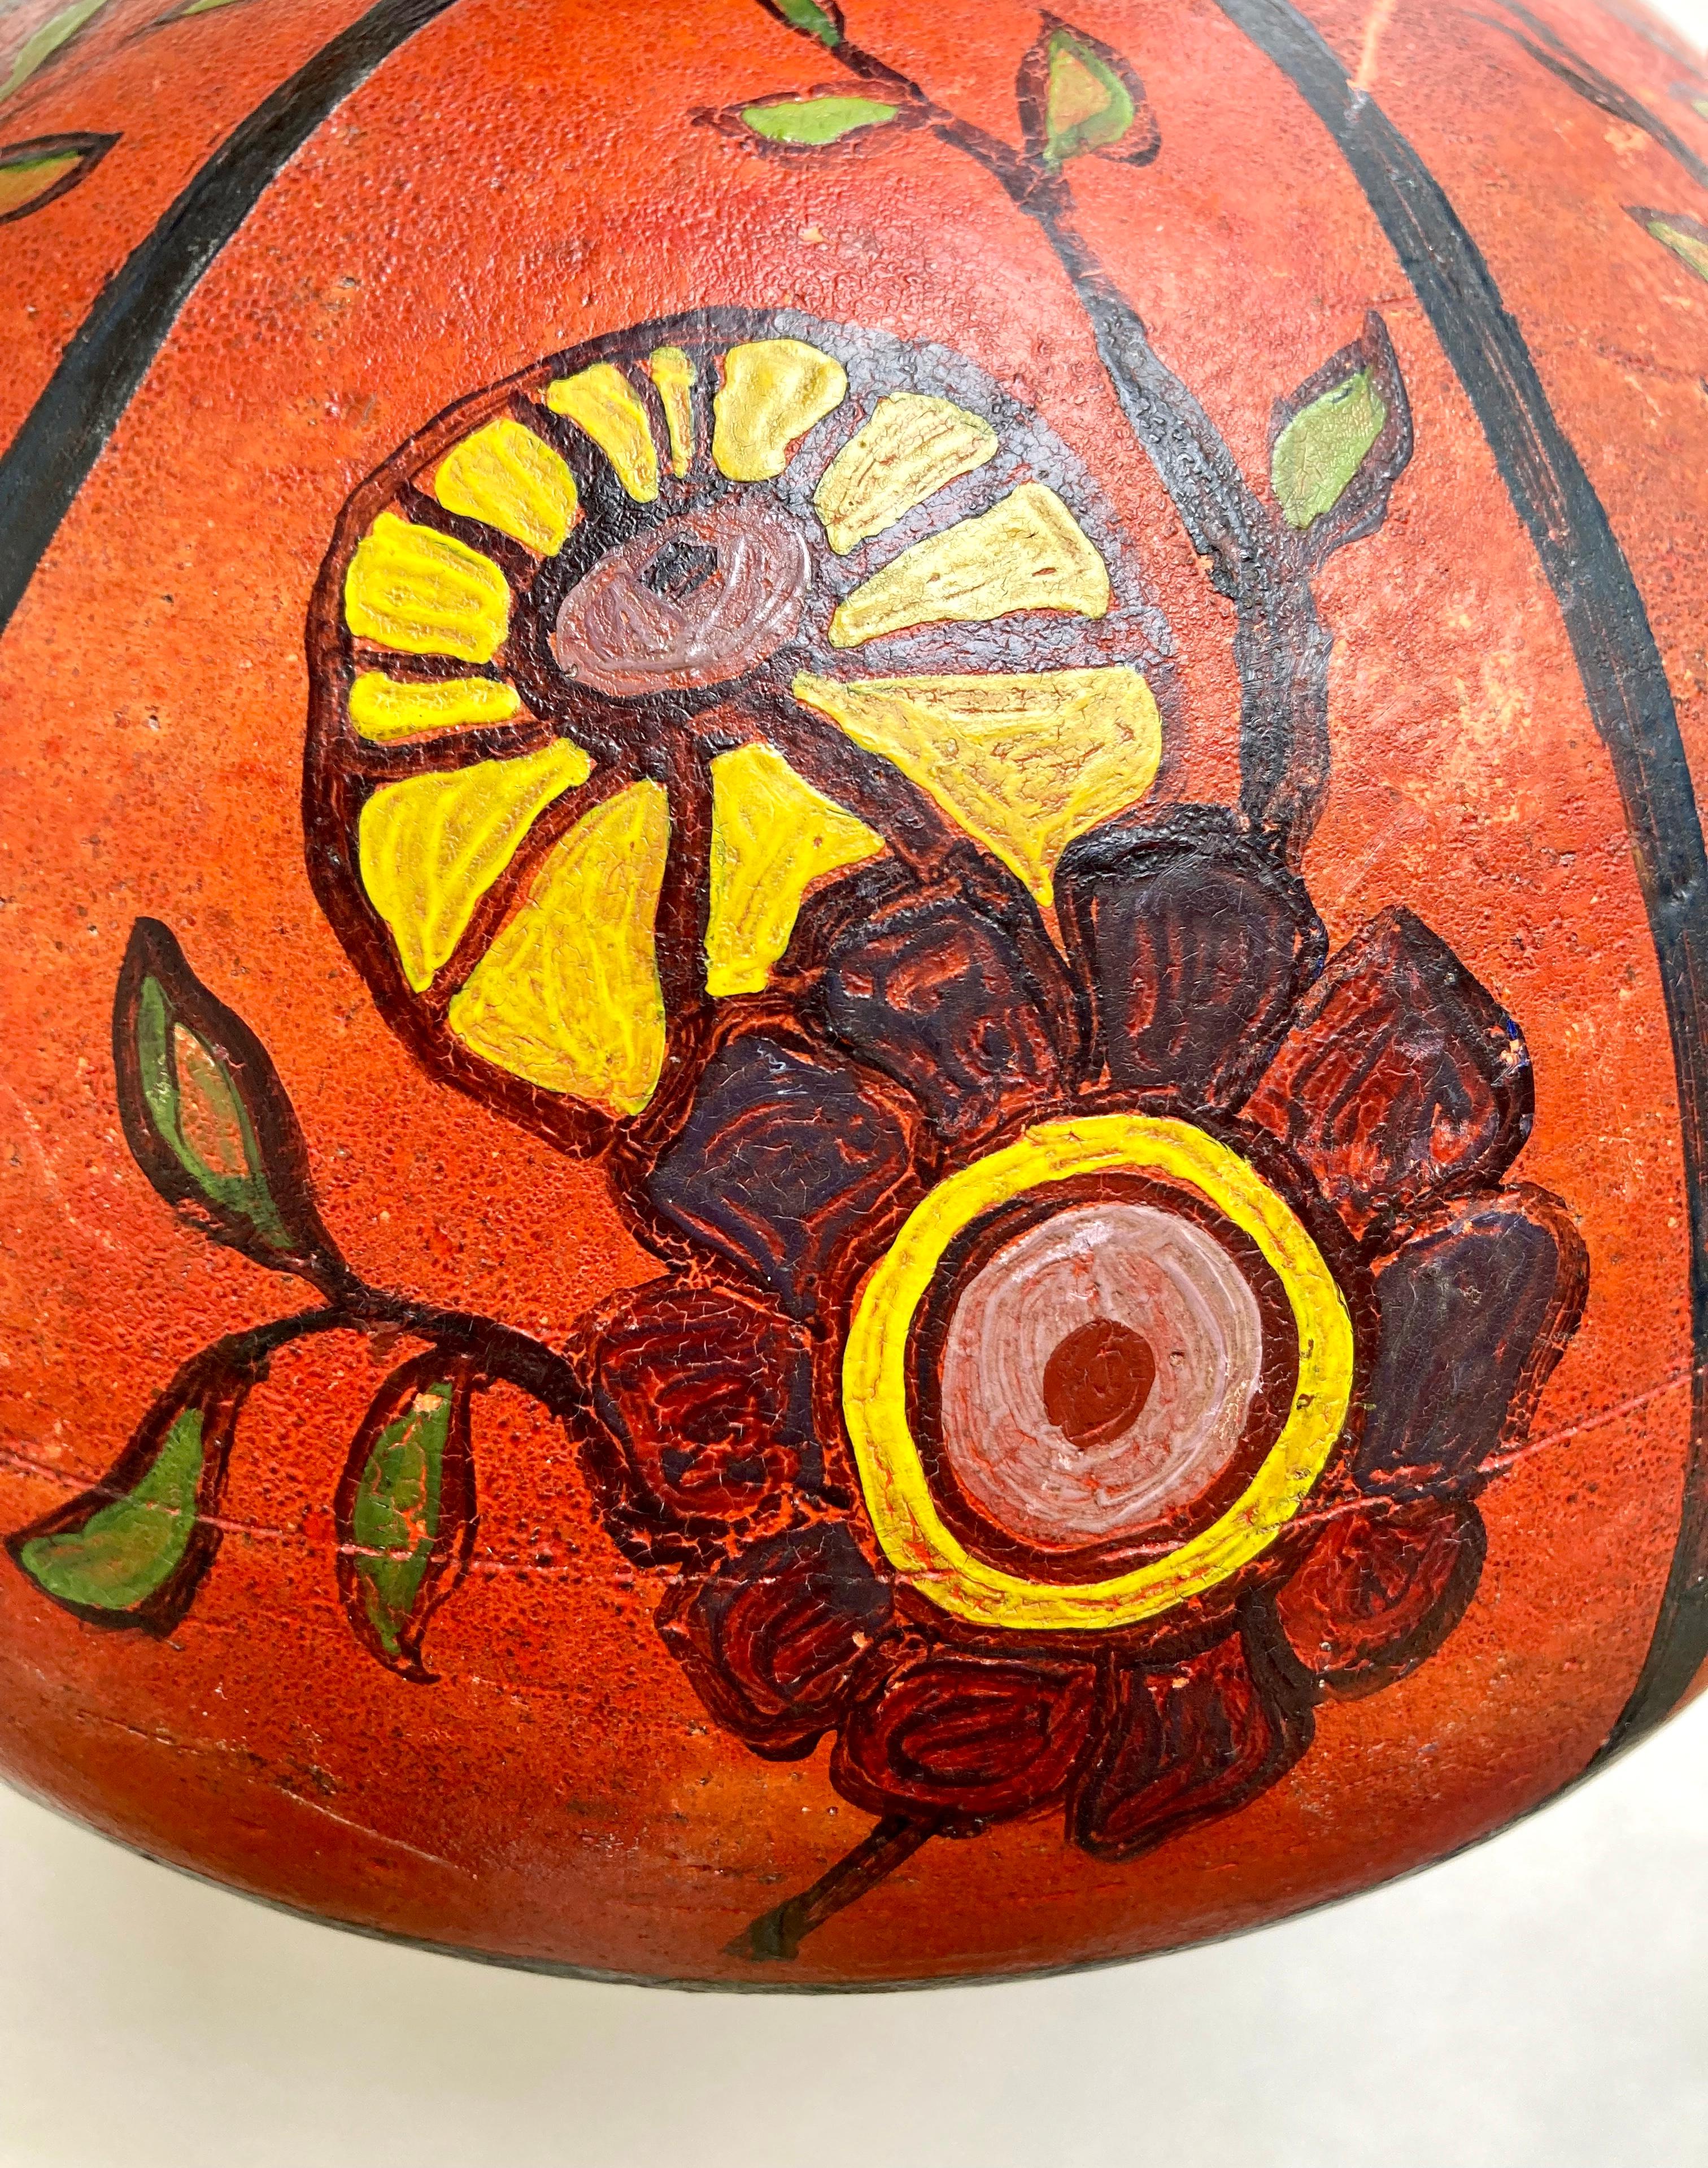 Ceramic Antique Hand-Thrown and Hand-Painted Art Pottery Vase with Floral Motifs   For Sale